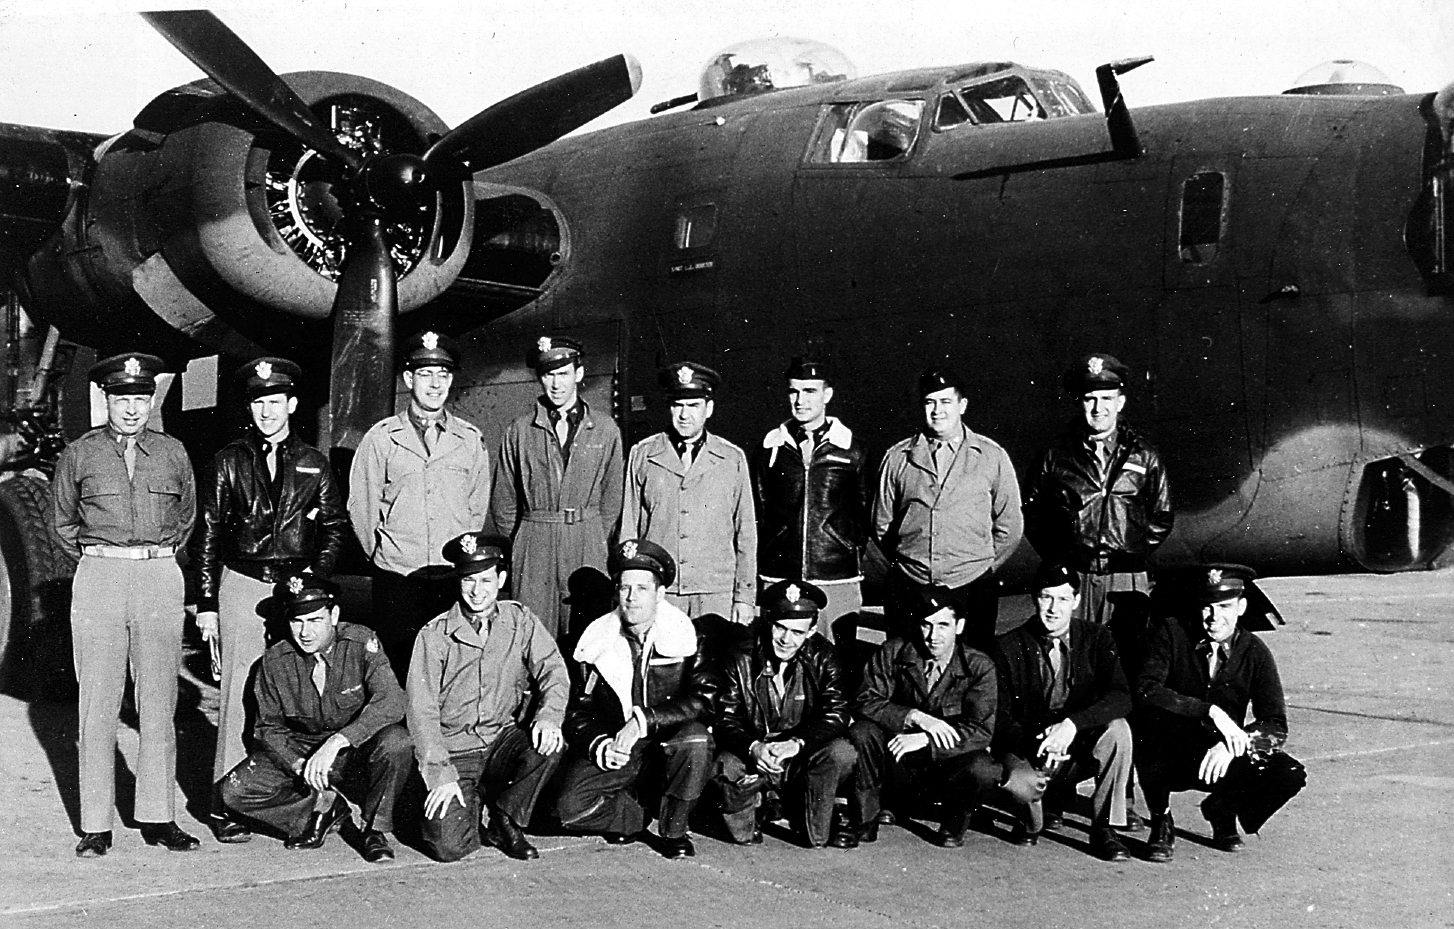 Captain James M. Stewart, USAAF, (standing, fourth from left) commanding officer, 703rd Bombardment Squadron (Heavy), 445th Bombardment Group (Heavy), with his squadron officers and a B-24 Liberator long-range heavy bomber, 1943. (U.S. Air Force)